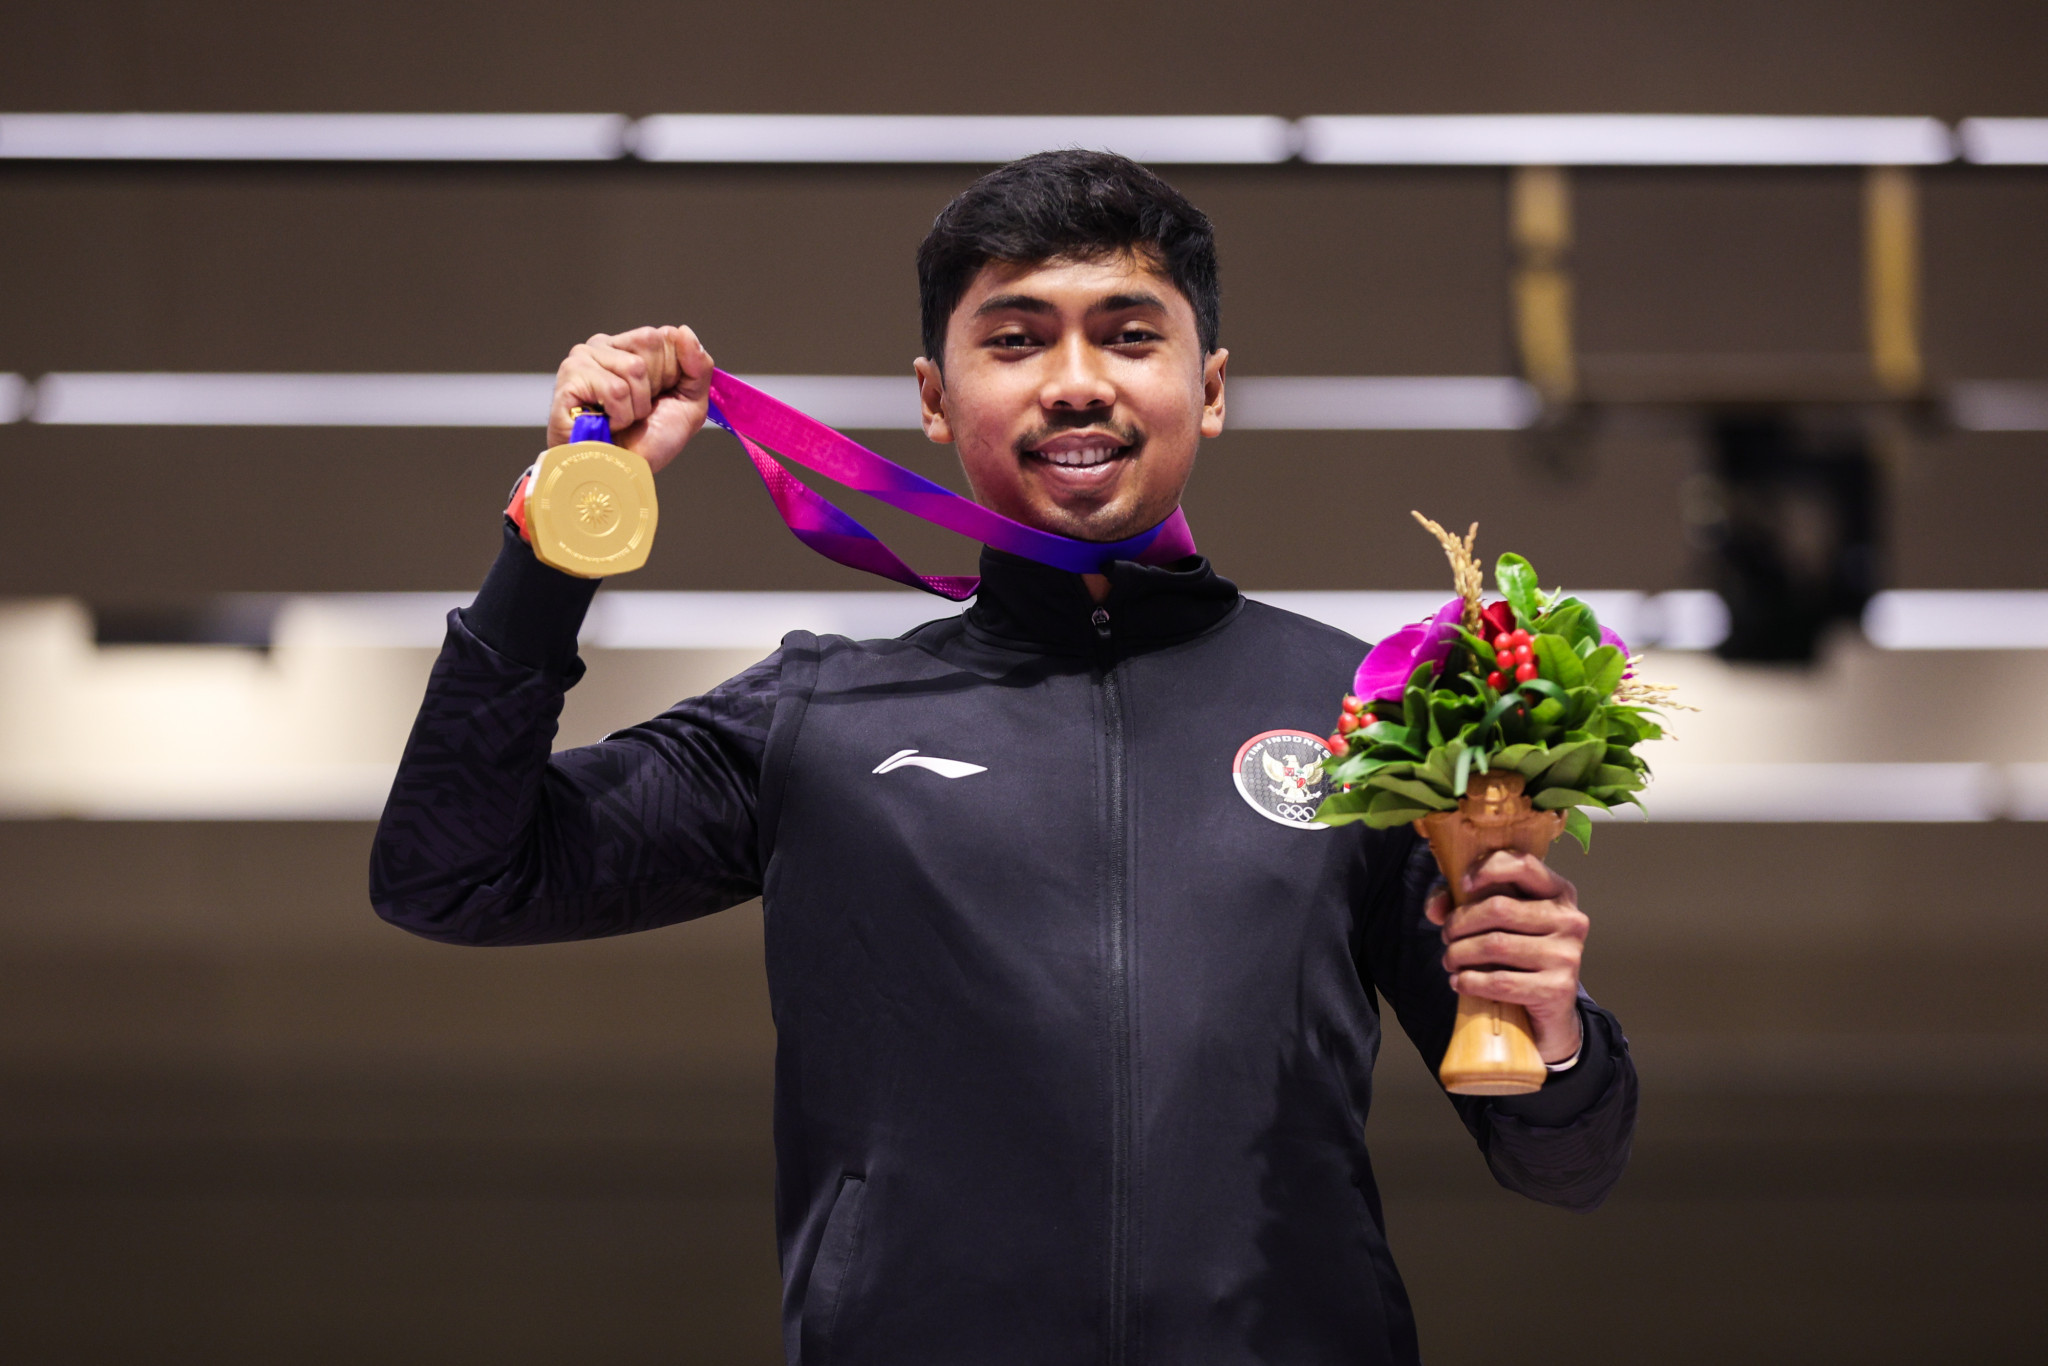 Muhammad Sejahtera Dwi Putra of Indonesia won his second shooting gold medal in as many days, this time in the men's mixed 10m running target ©Hangzhou 2022